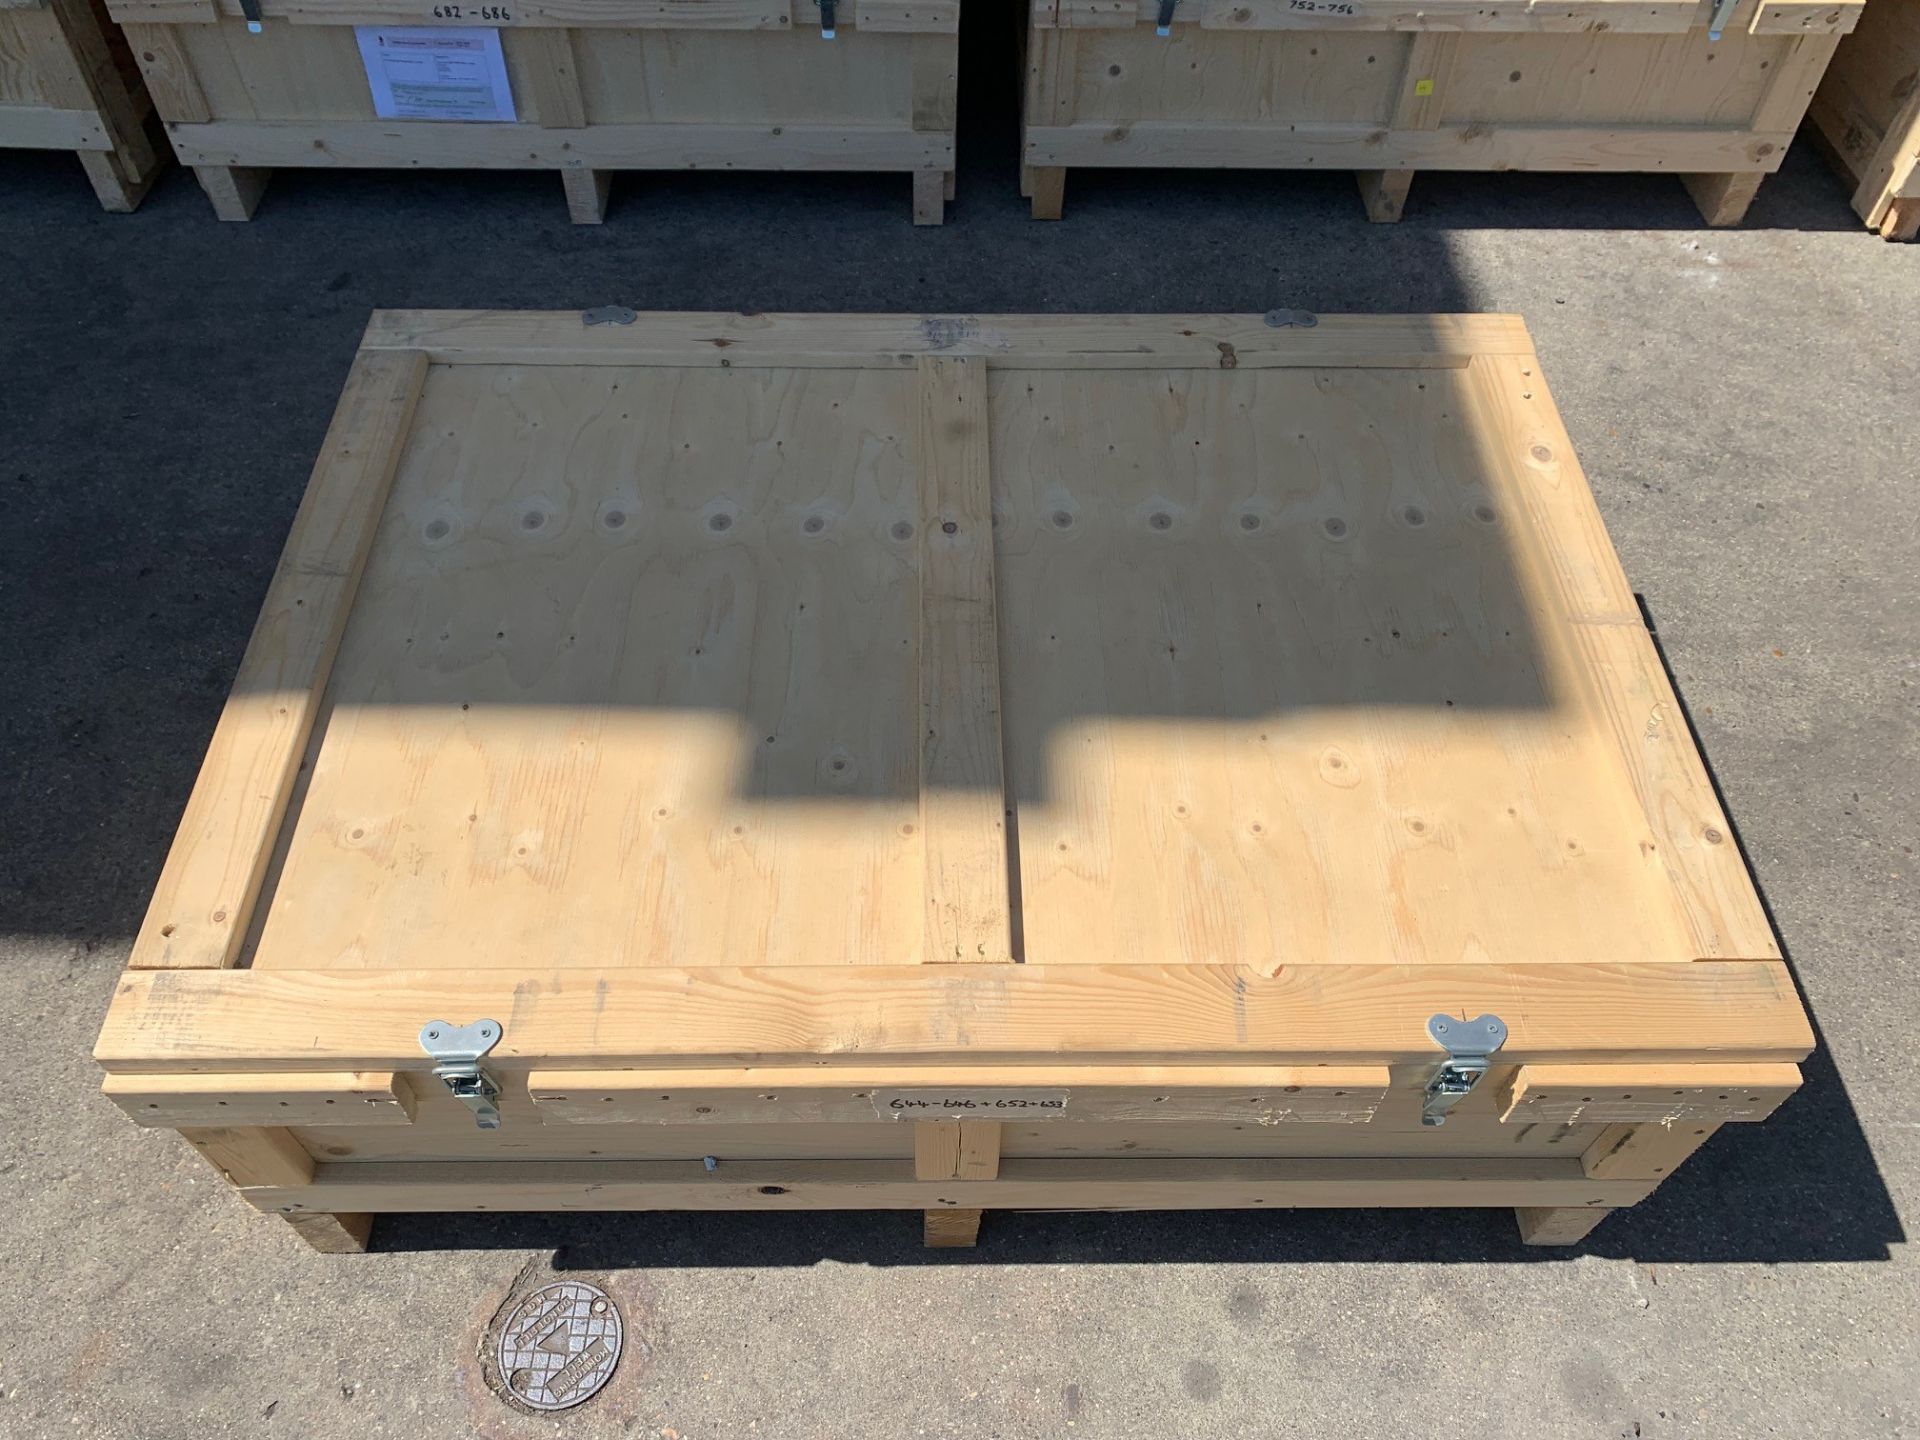 5x Wooden Shipping crates - External Dimensions - L122 x W89 x H43 - Image 2 of 7